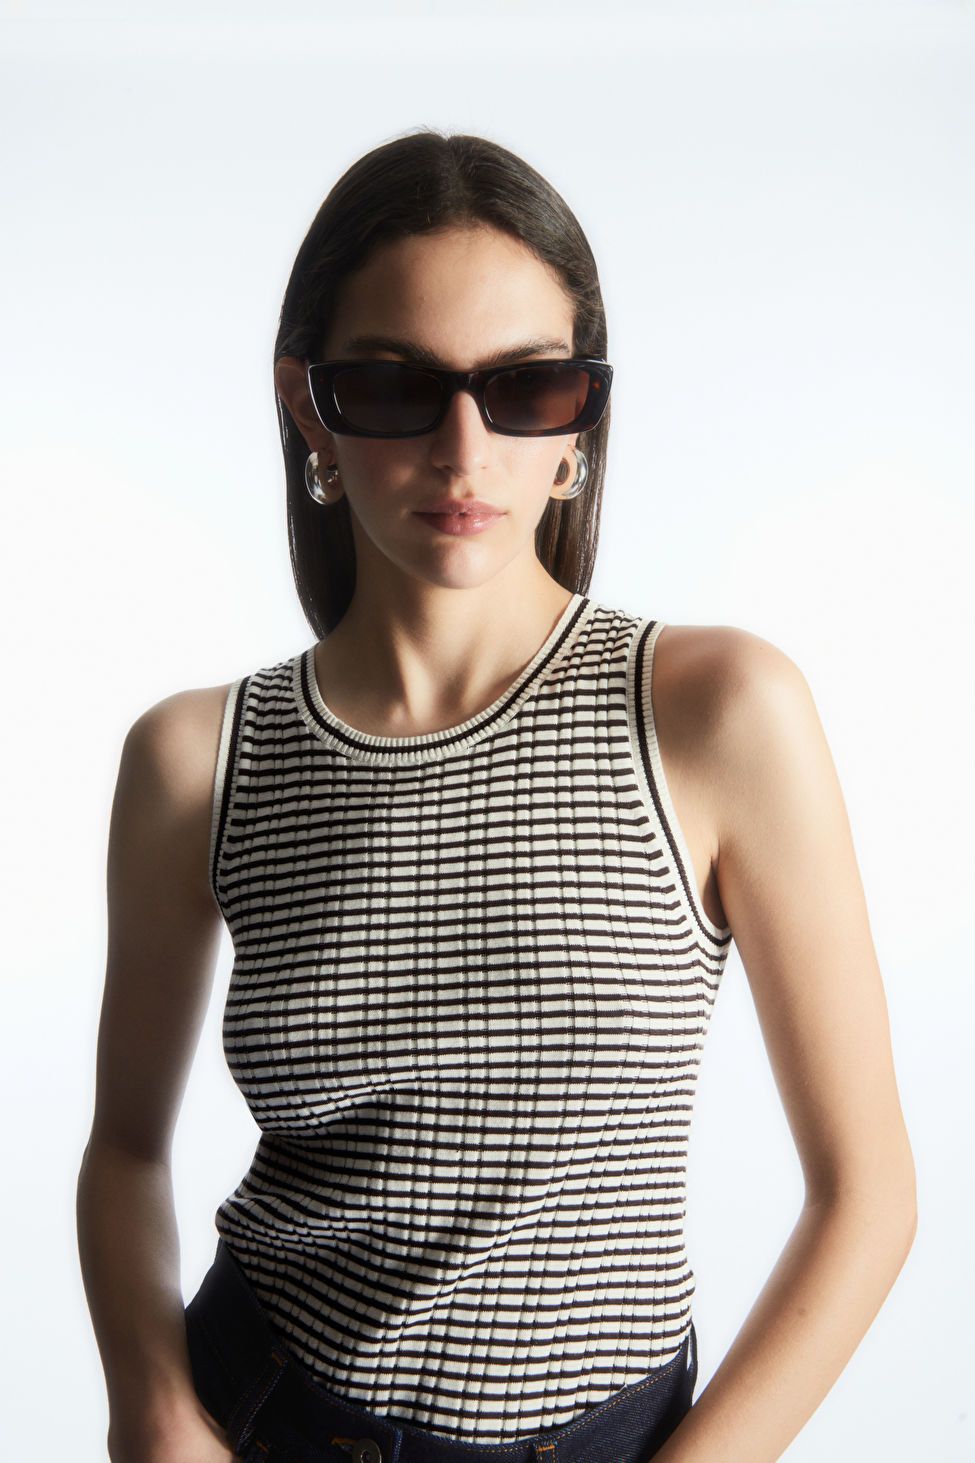 RIBBED-KNIT SILK TANK TOP - WHITE / BROWN / STRIPED - COS | COS UK